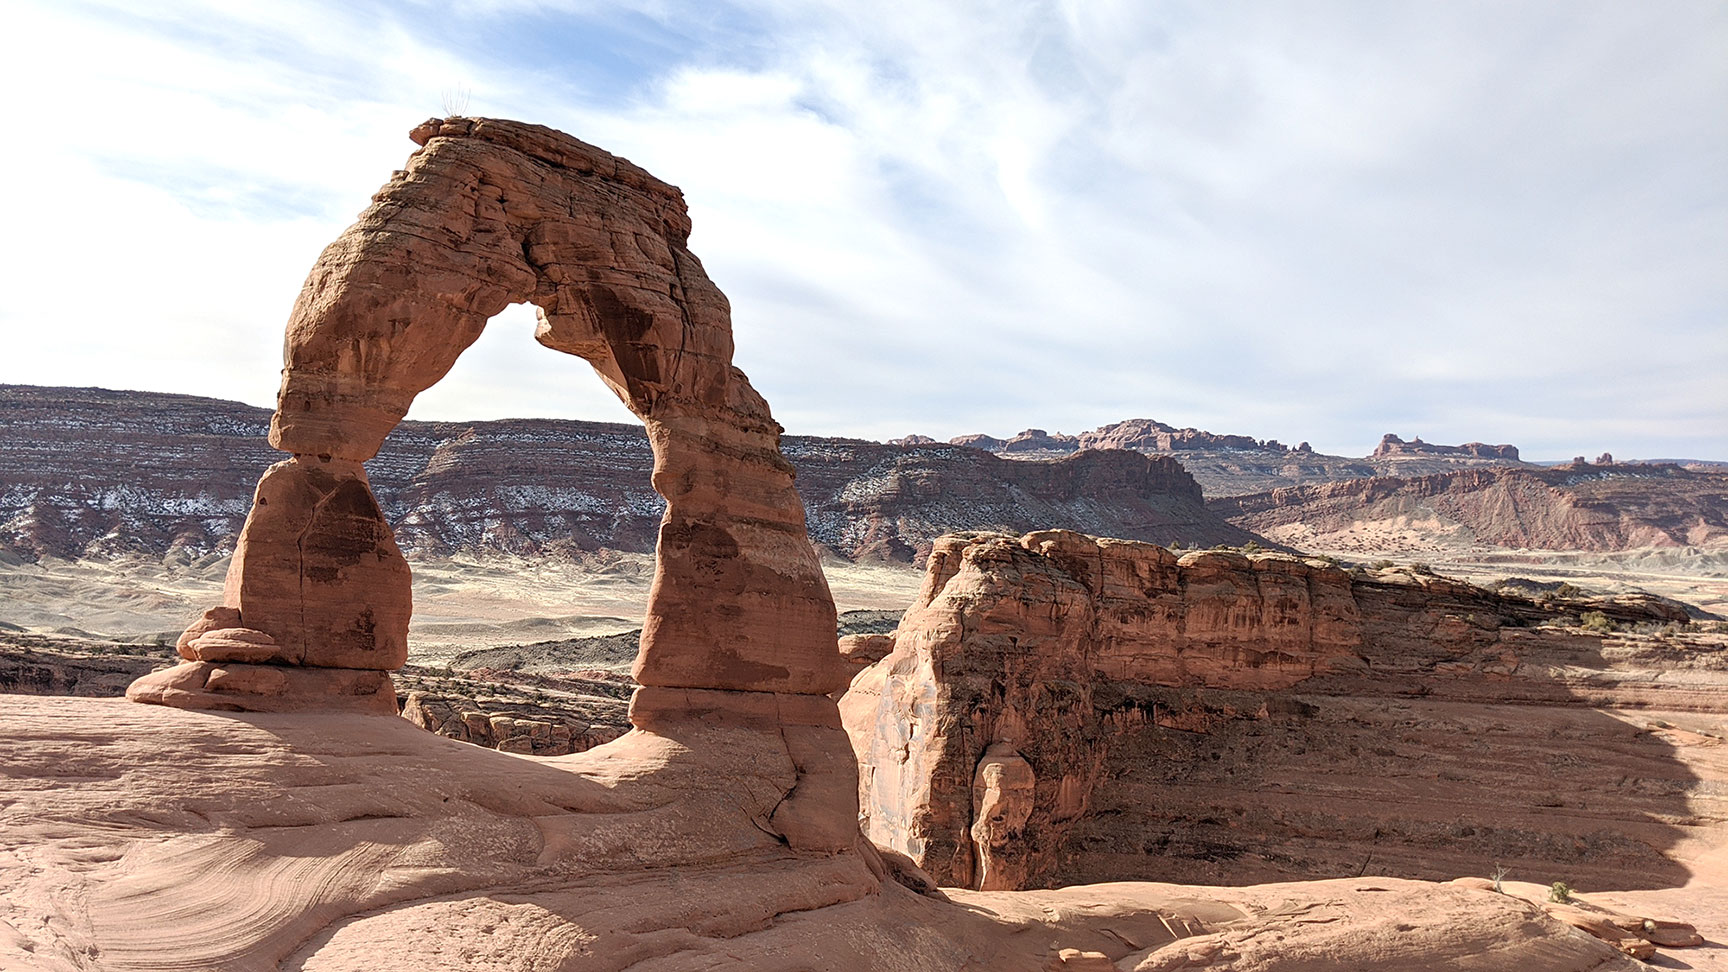 Delicate arch seen during arches national park tour